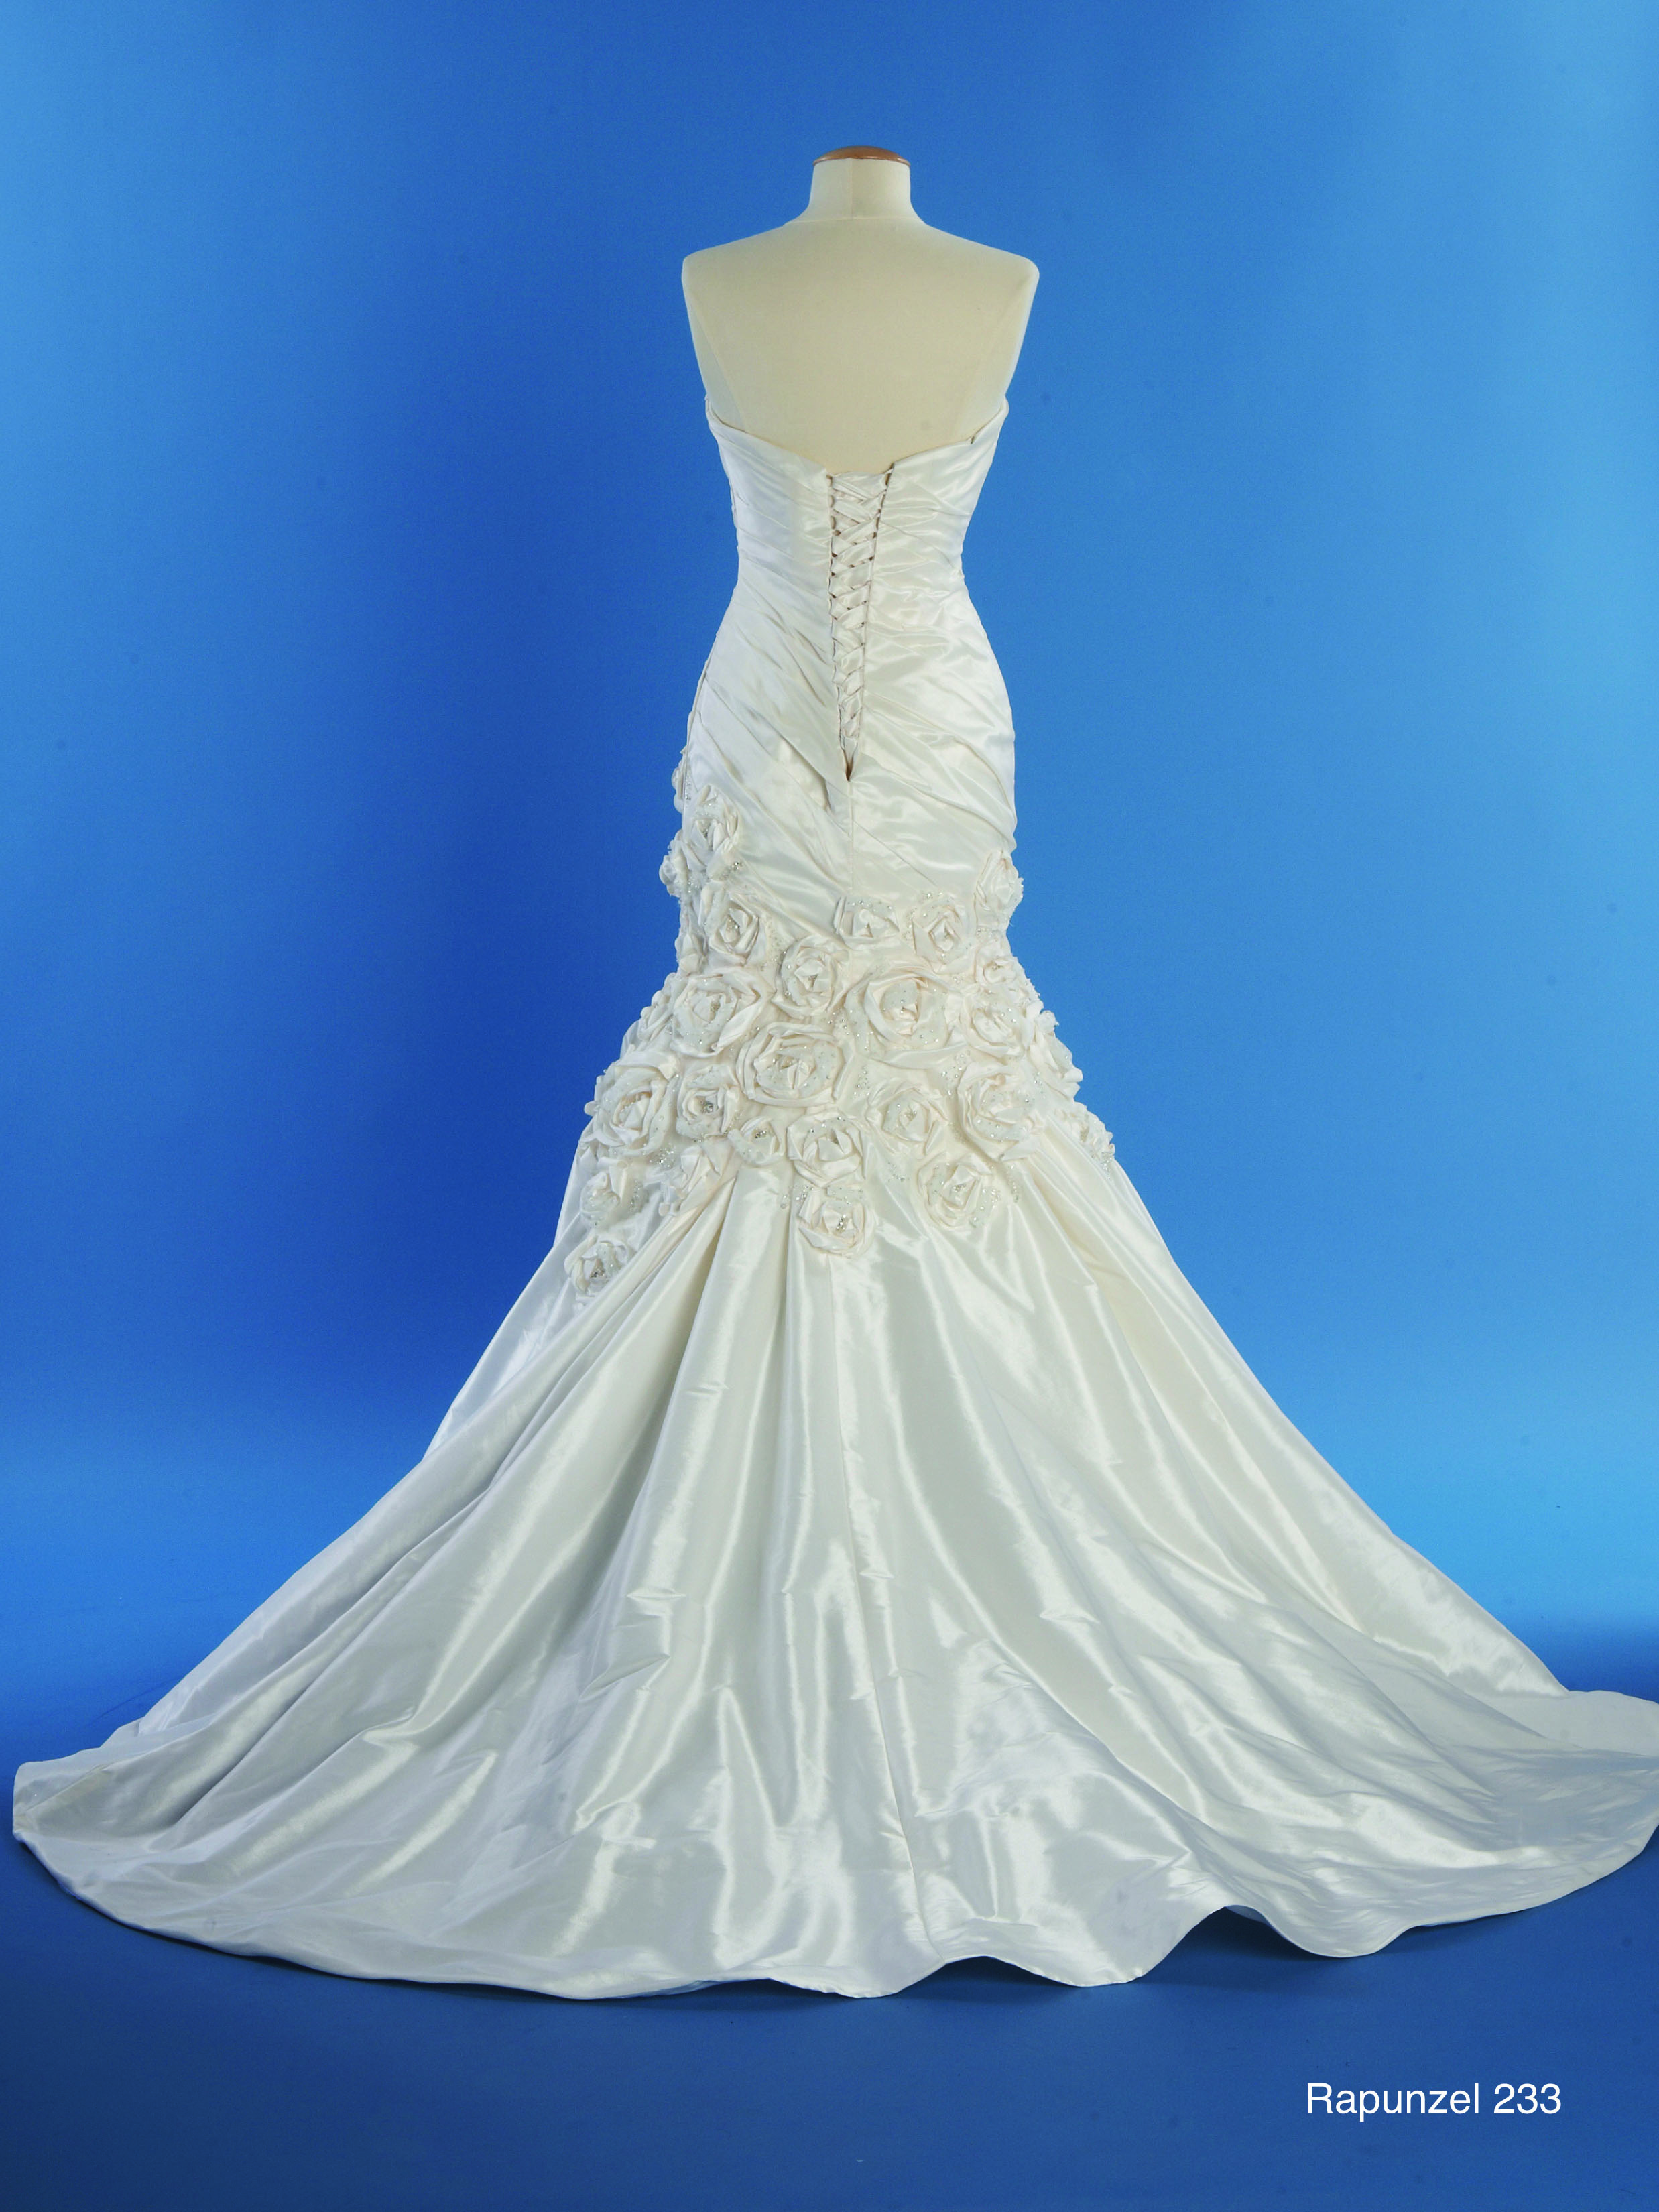 Alfred Angelo's Disney 8 Rapunzel Bridal Collection   Lacey ...